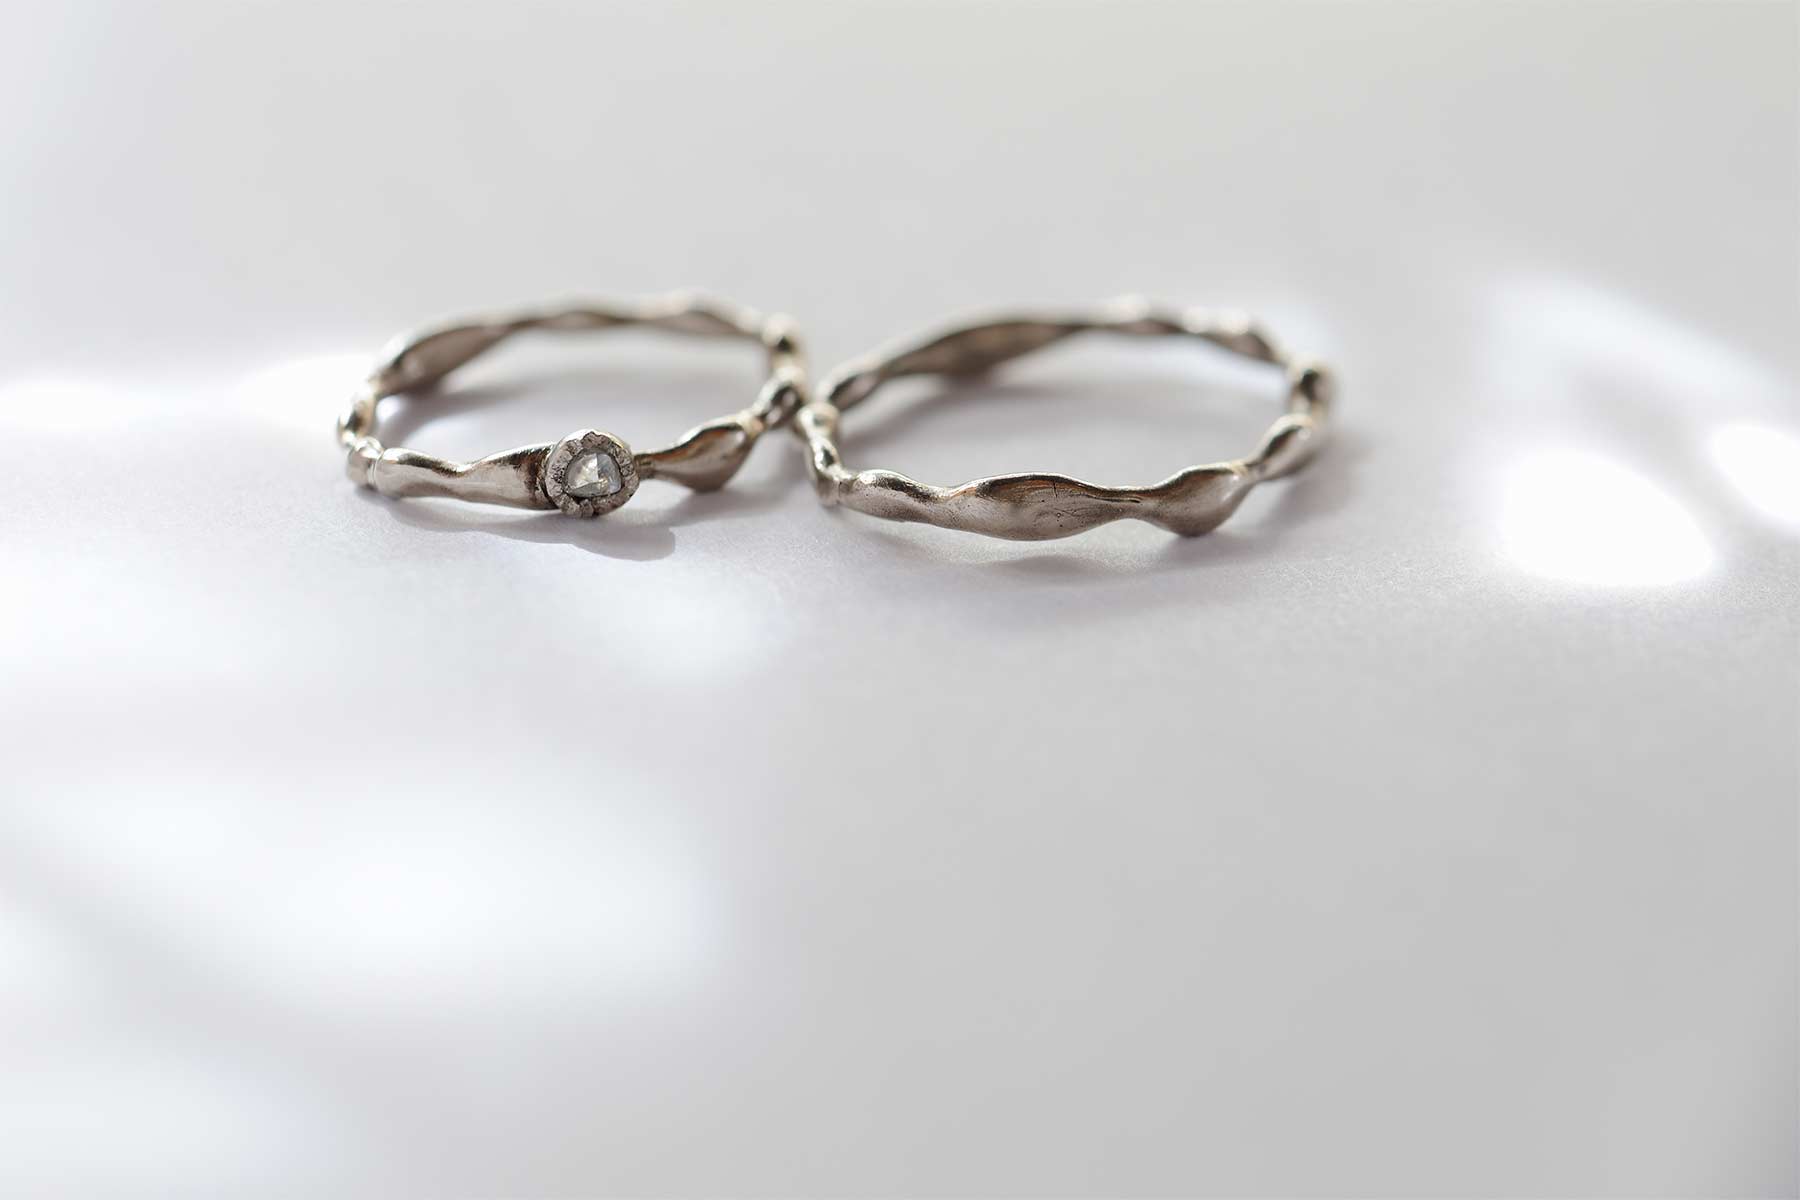 The photo of the couple rings: Dawn